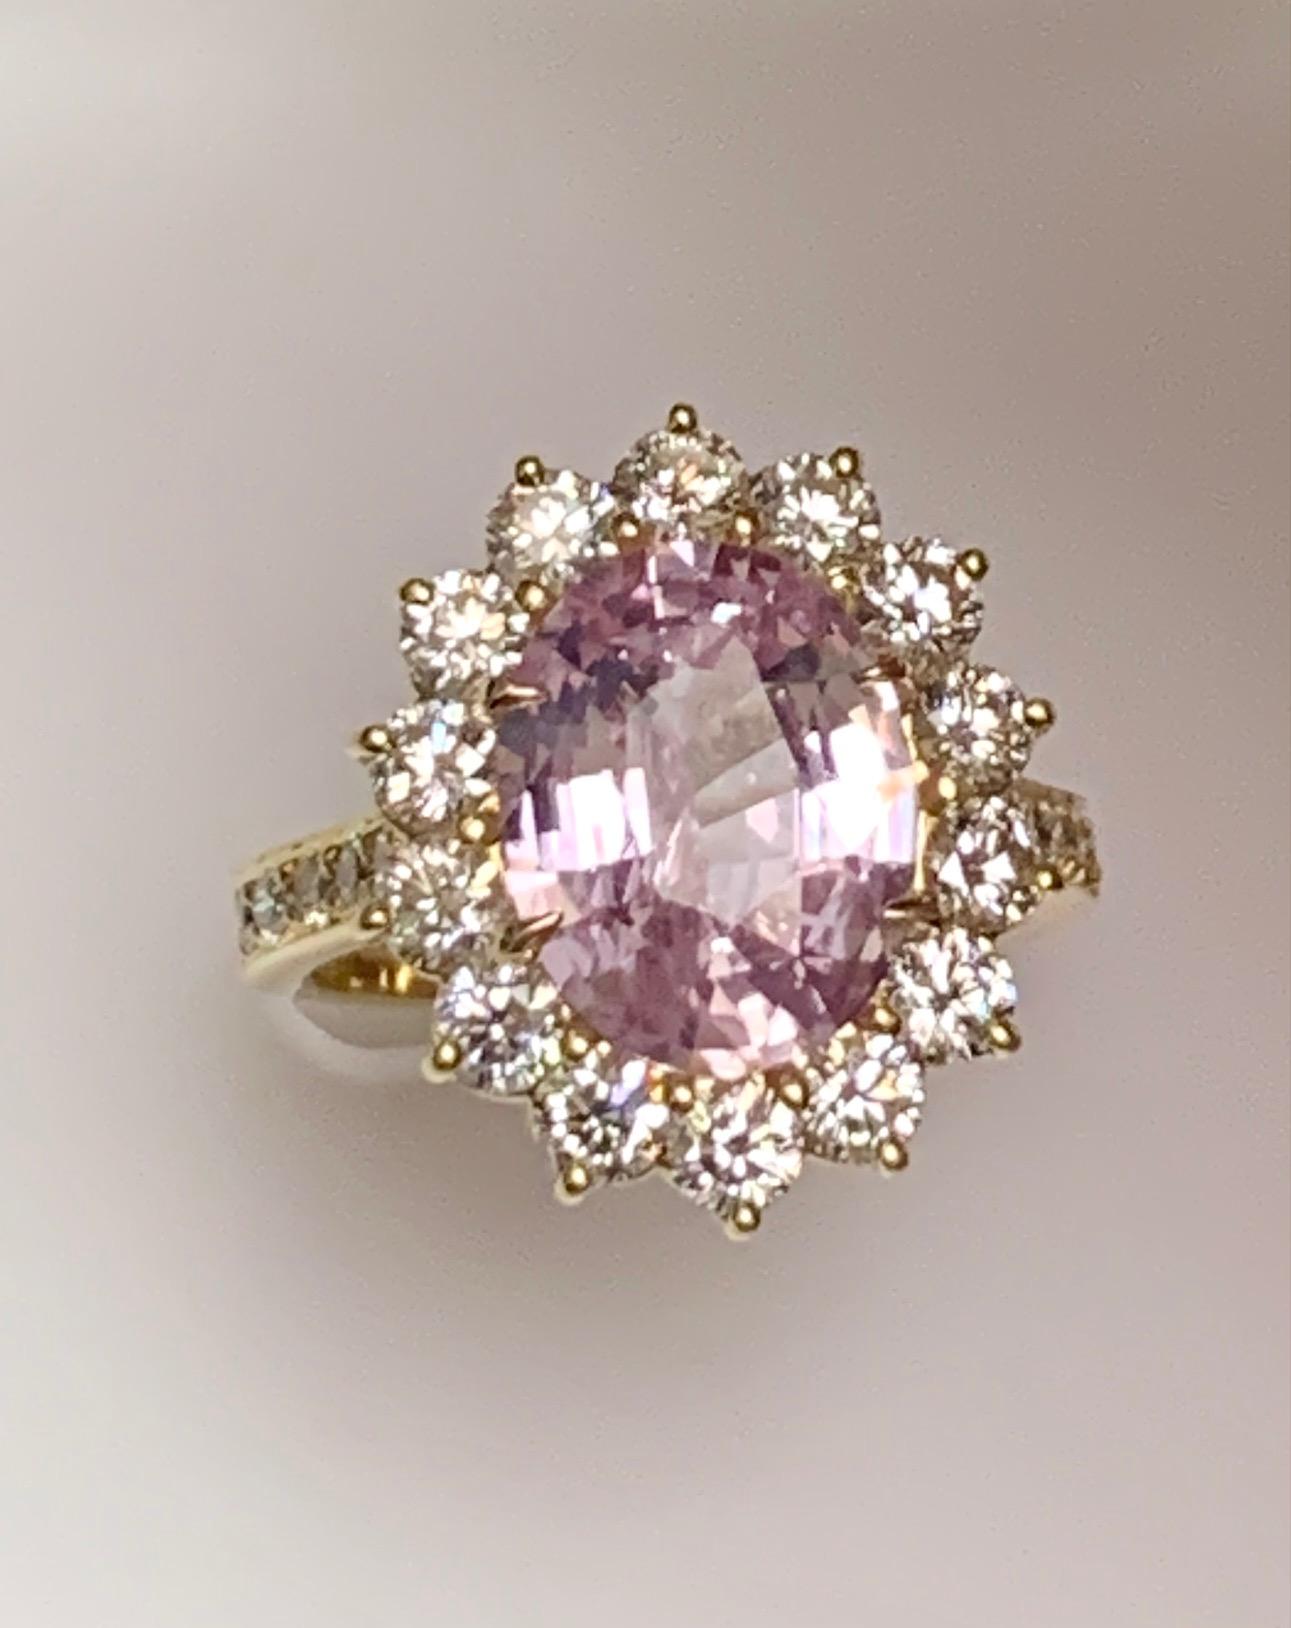 4.97 Carat oval pastel color pink sapphire set in 18k yellow gold ring with 1.61 carat round diamonds (G-H SI1) around it and half way on the shank.